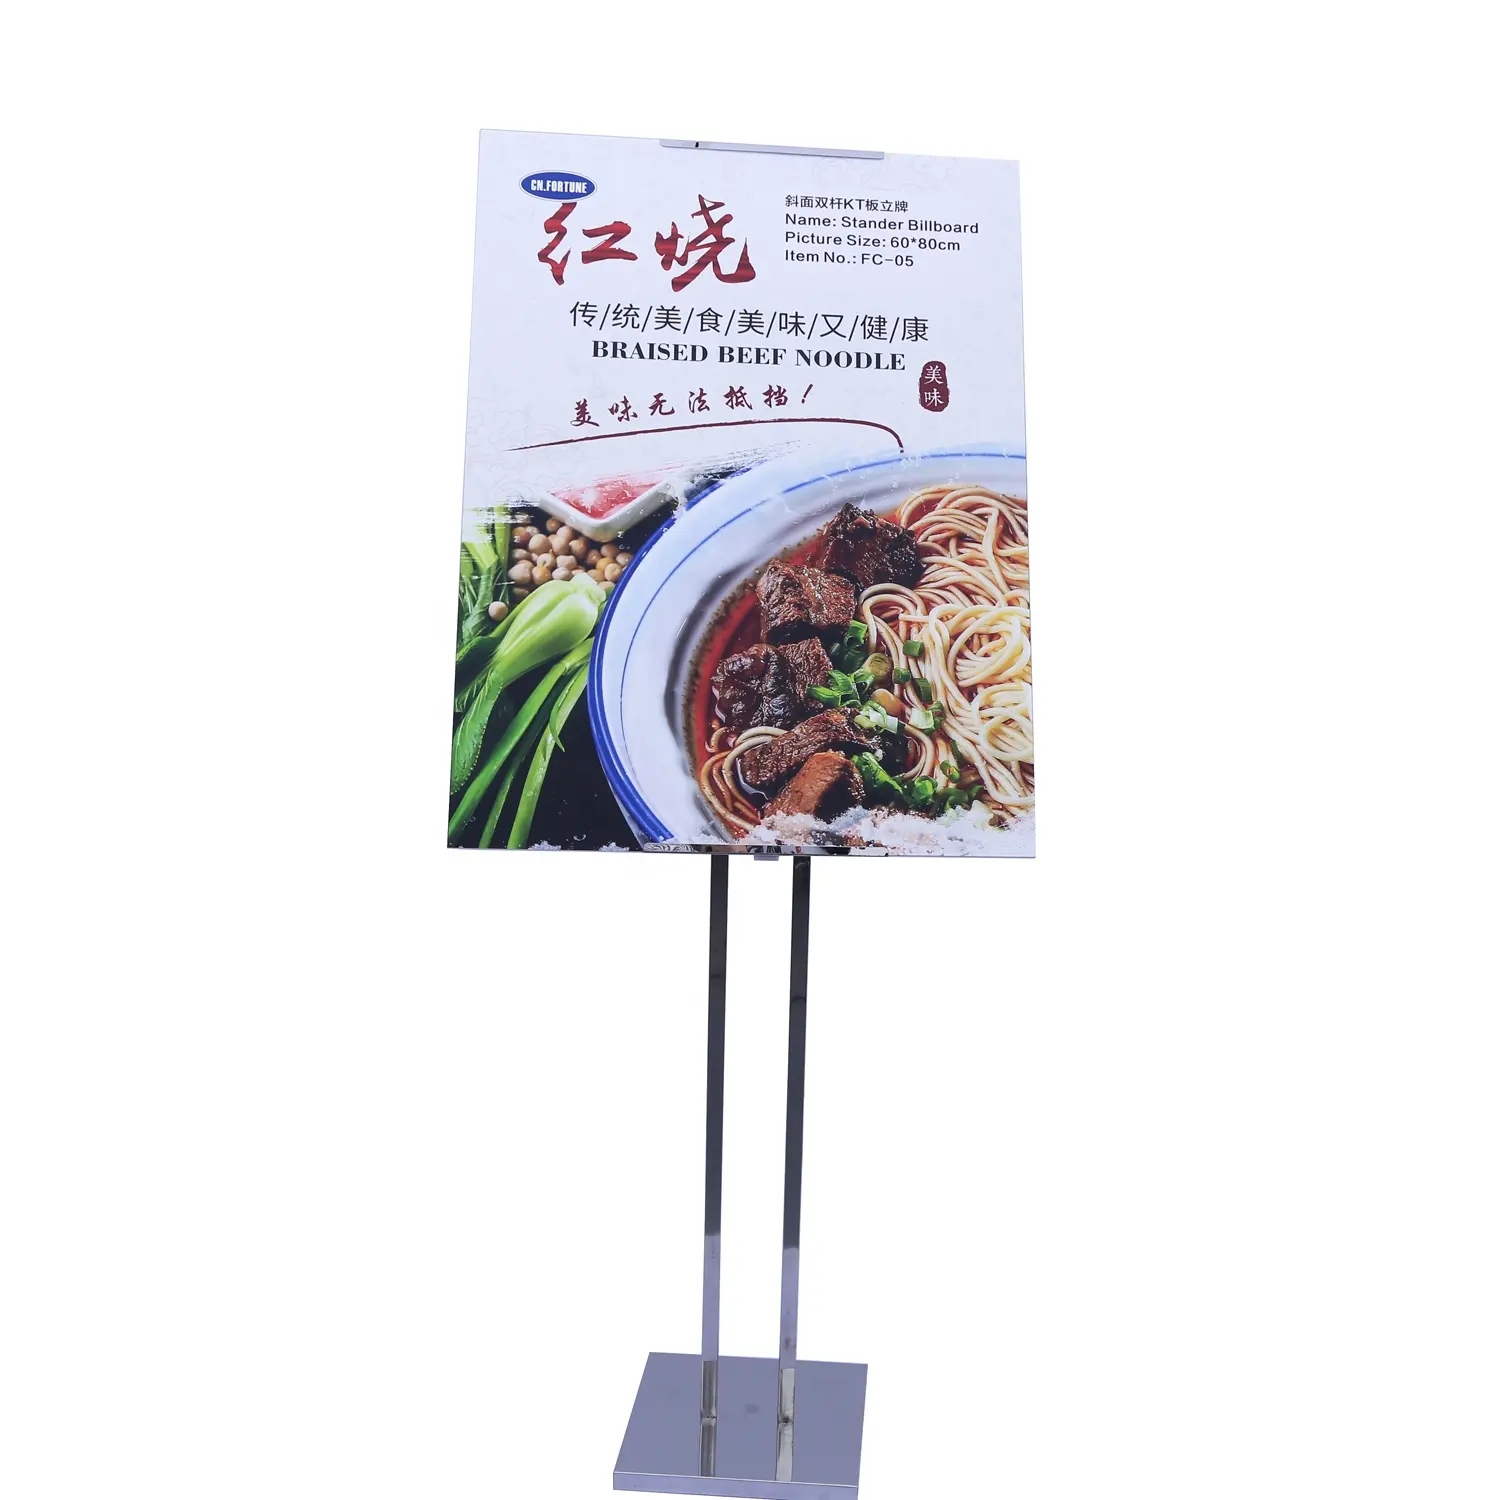 Big Size A1 60x80cm Billboard Stand For Advertising Promotion Use